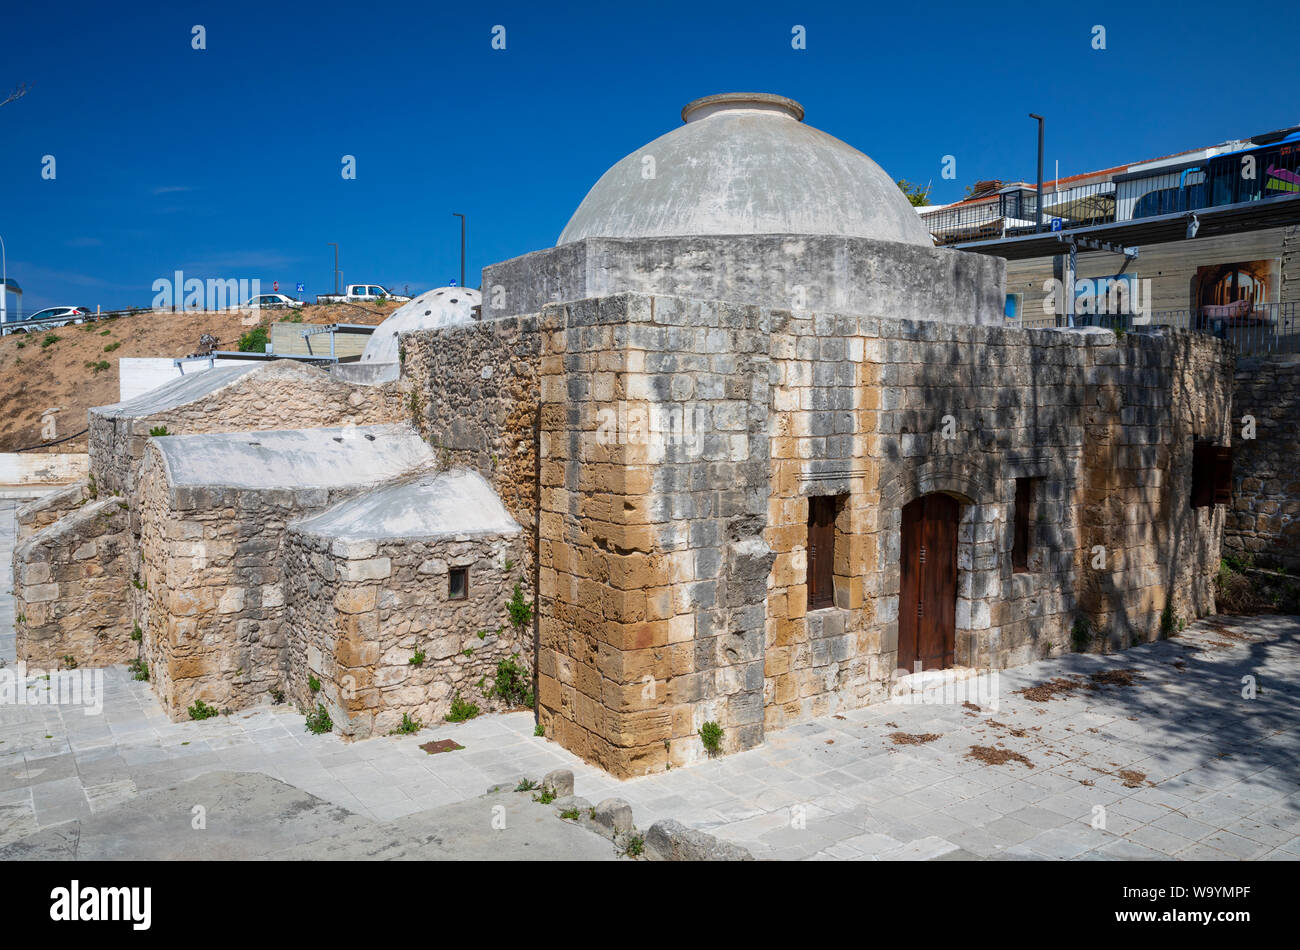 Hamam / Ottoman baths in Paphos old town, Cyprus Stock Photo